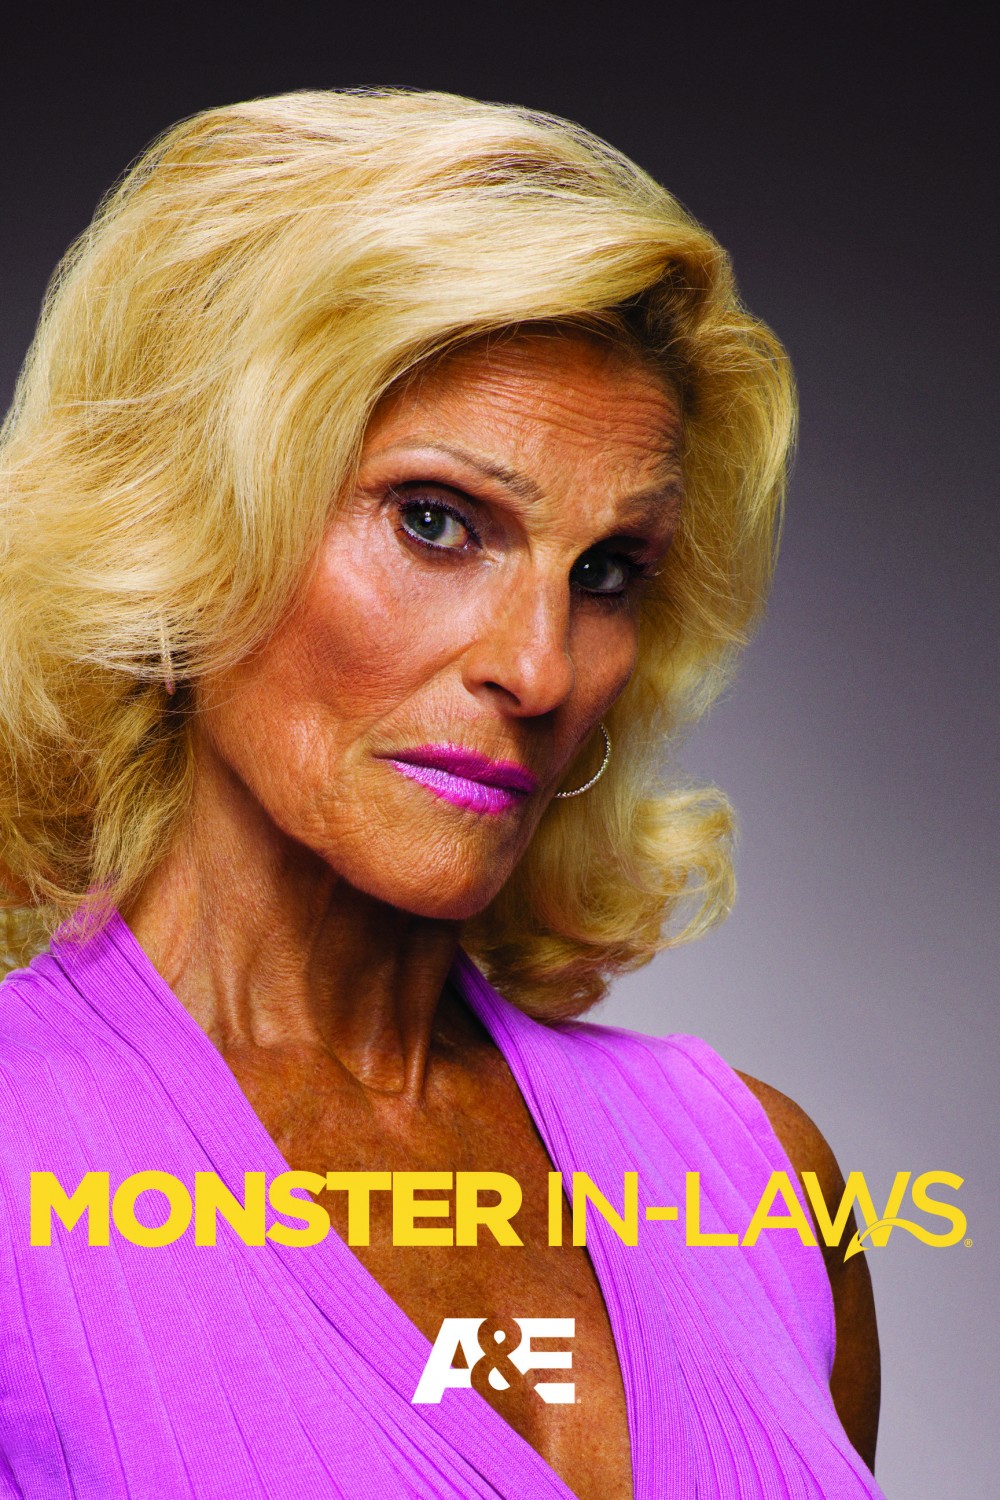 Extra Large TV Poster Image for Monster in-Laws (#2 of 2)